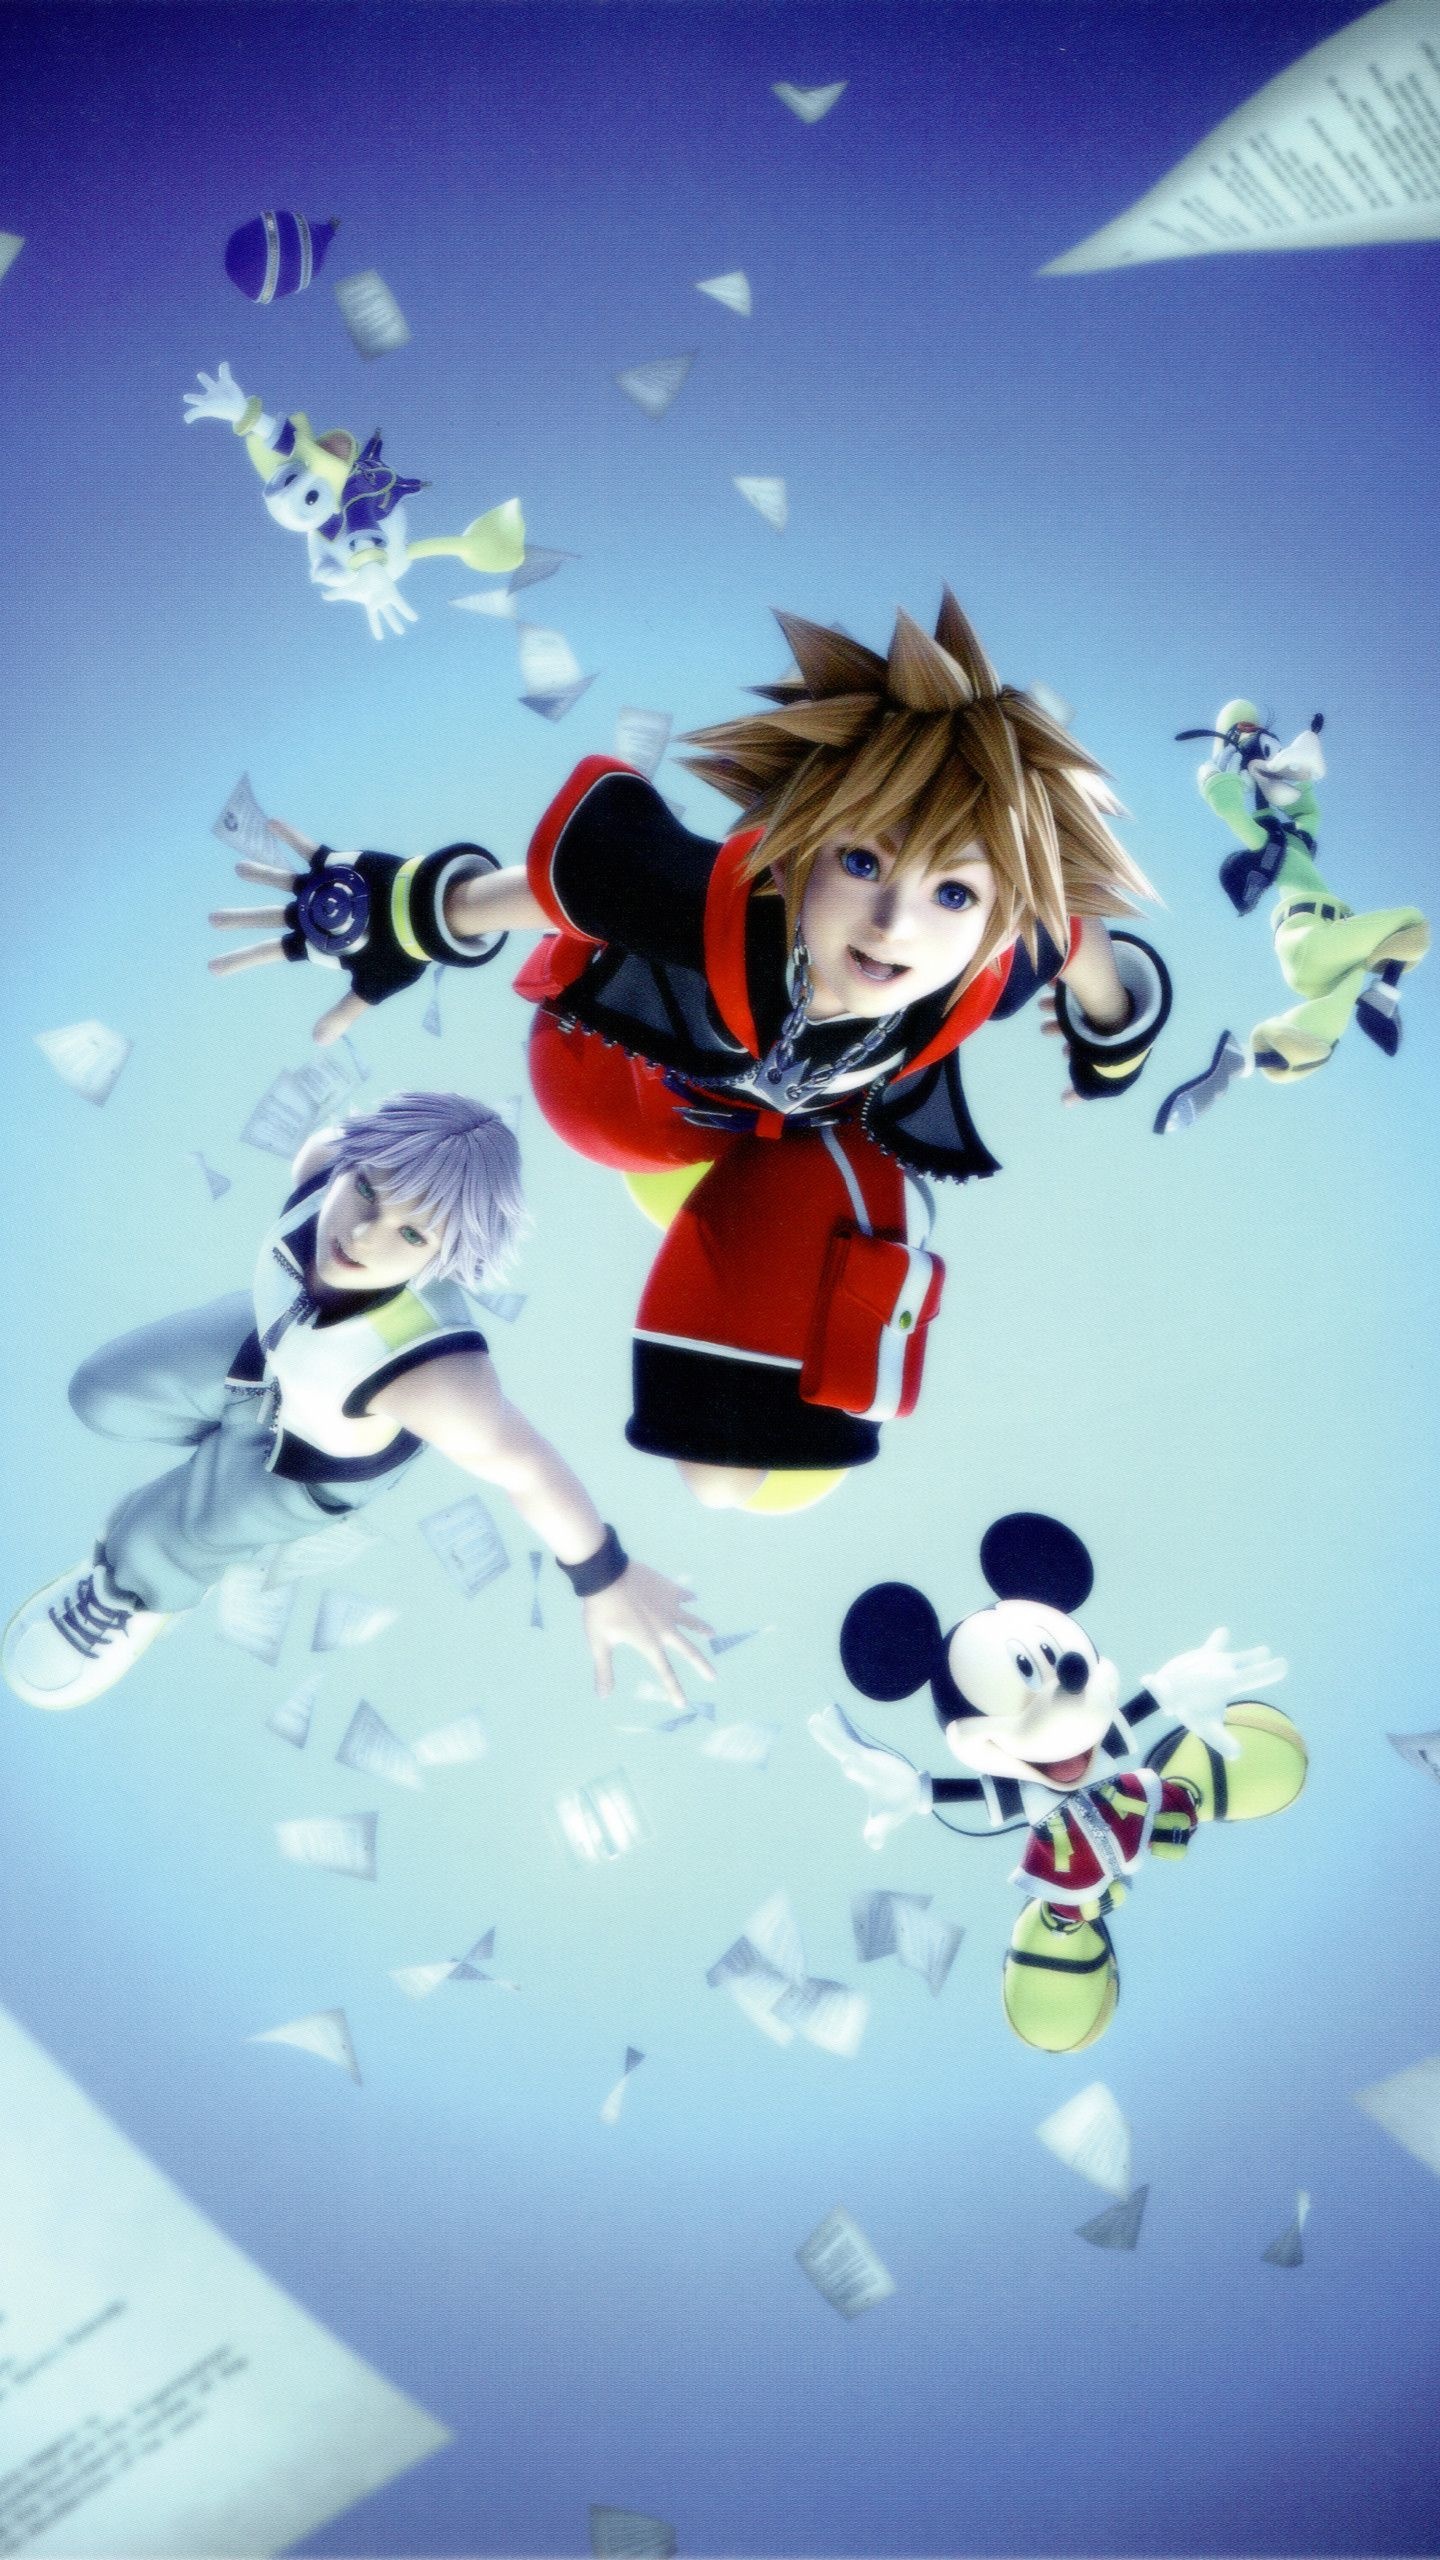 Kingdom Hearts mobile wallpapers, Sora and friends, Mobile gaming, Keyblade wielders, 1440x2560 HD Handy